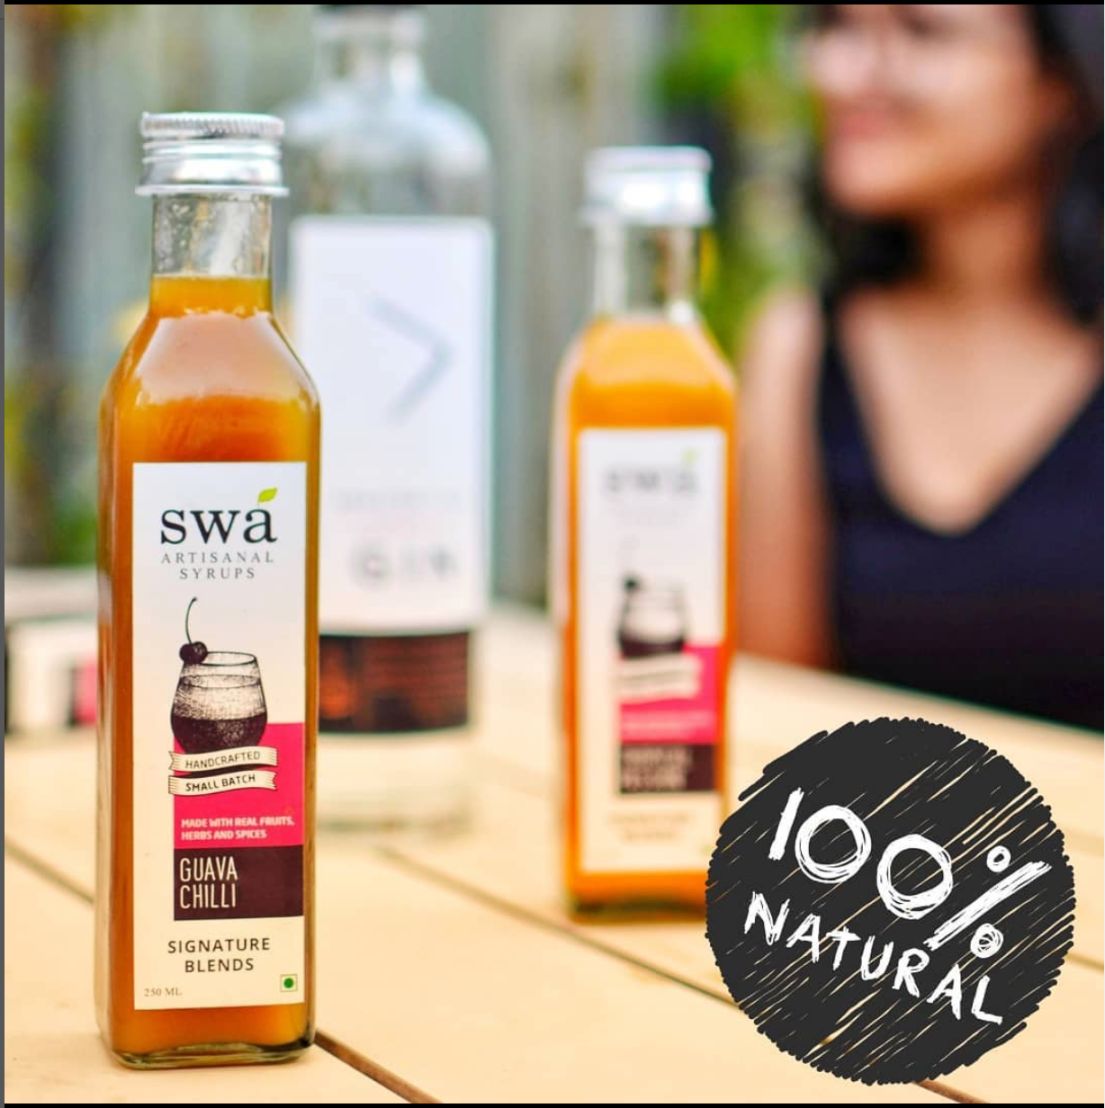 swa guava chilli artisanal syrup bottle on a wooden table 